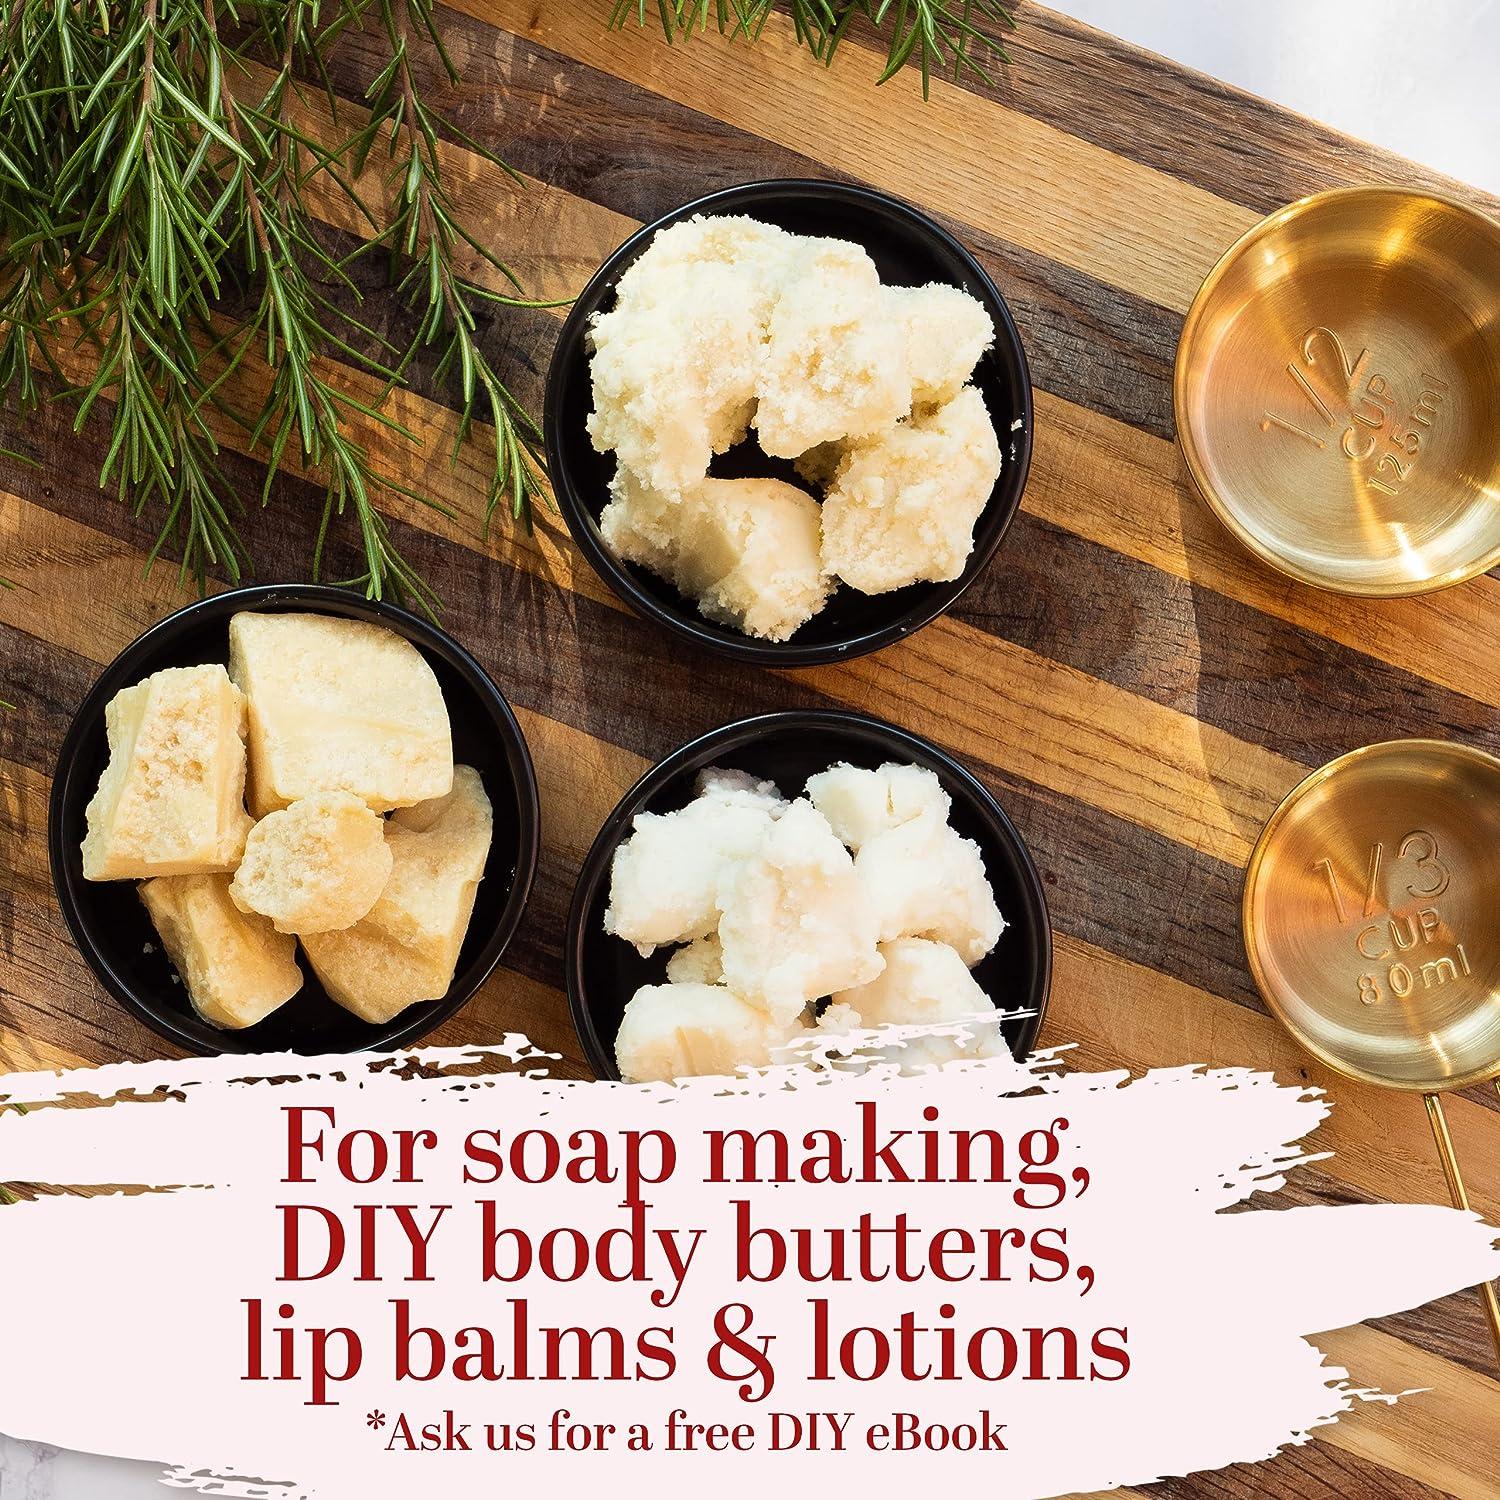 5 Wonderfully Soothing Shea Butter Soap Recipes - Bellatory